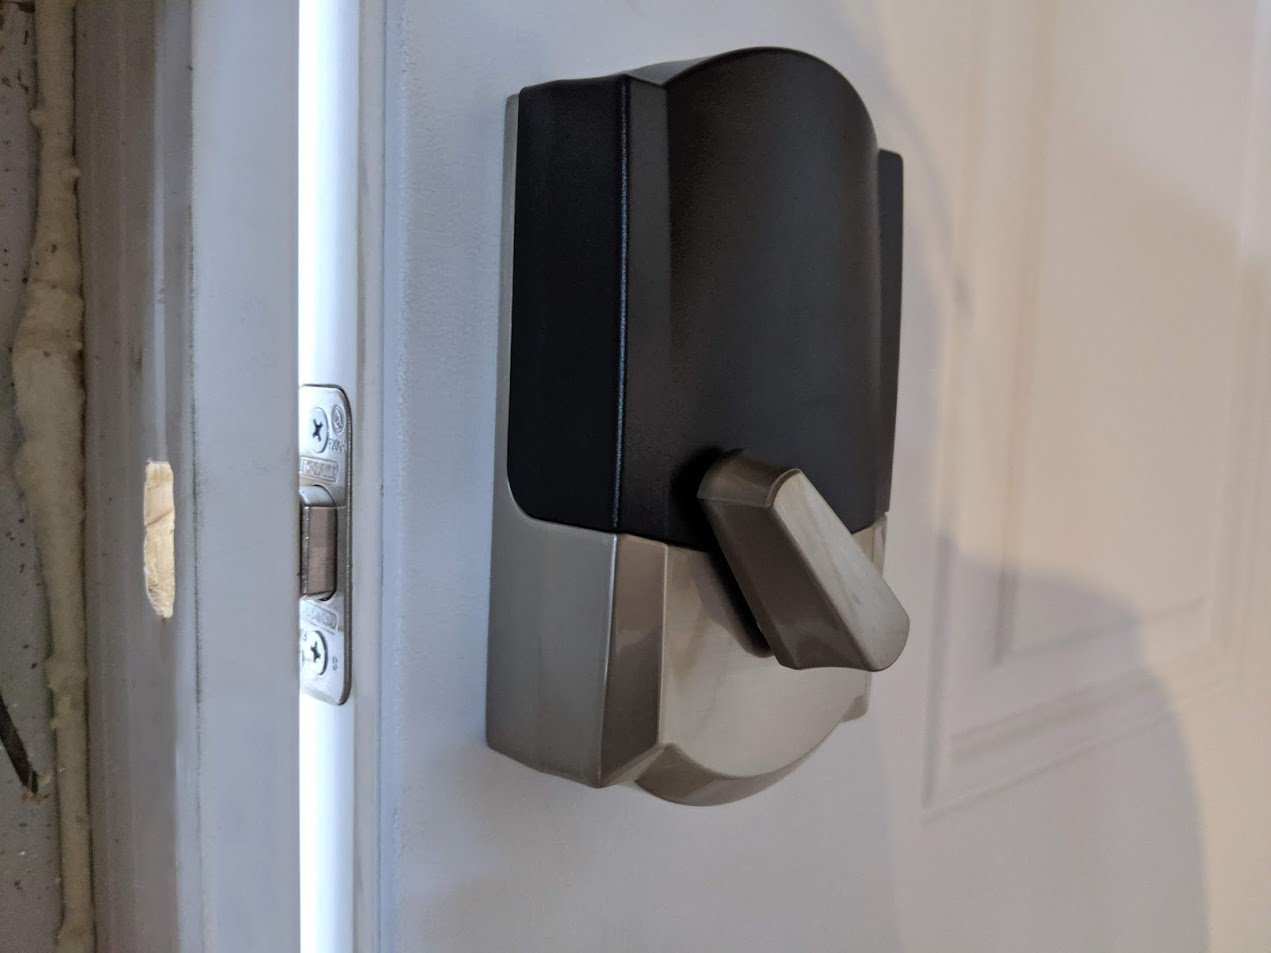 Schlage Encode review: A convenient smart lock to keep your home secure